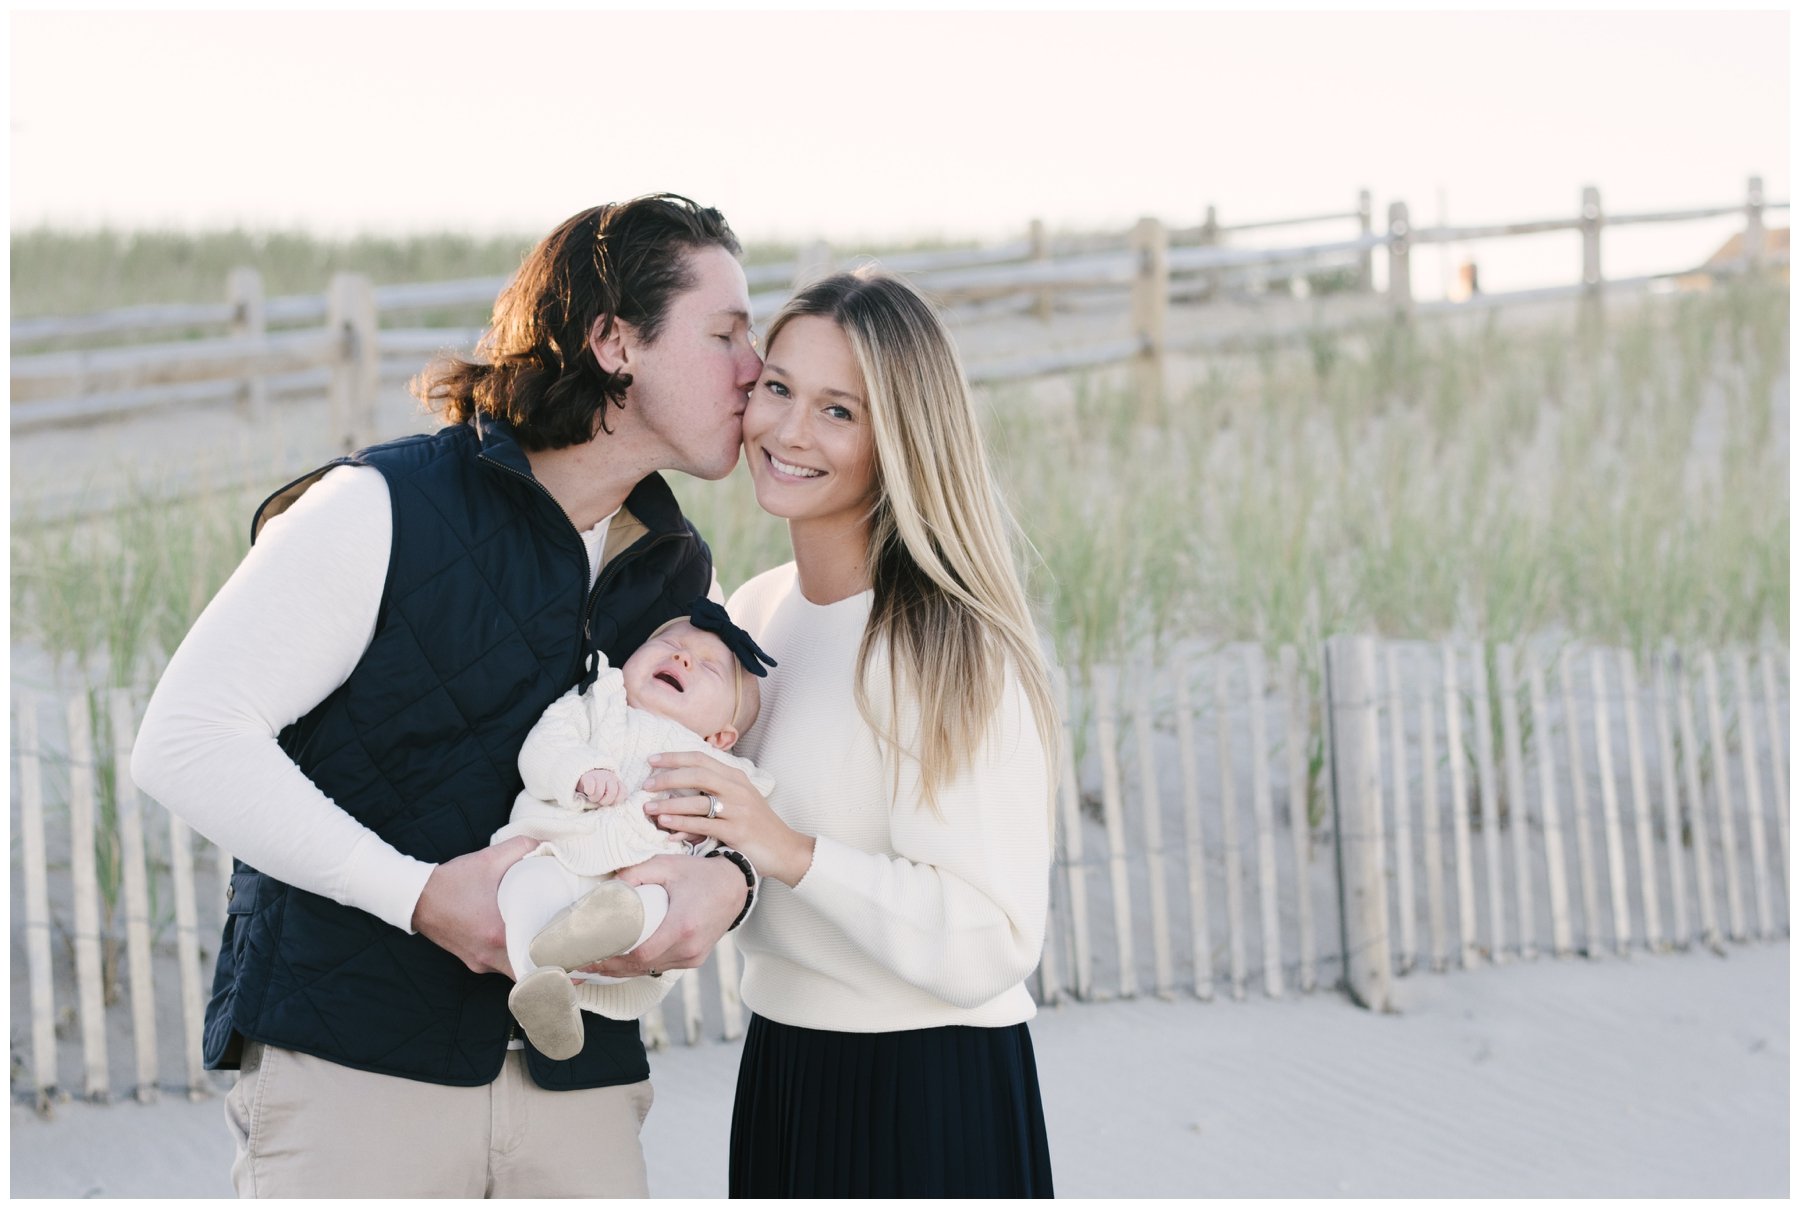 Husband kissing wife while holding newborn during family session with family beach photographer | NKB Photo